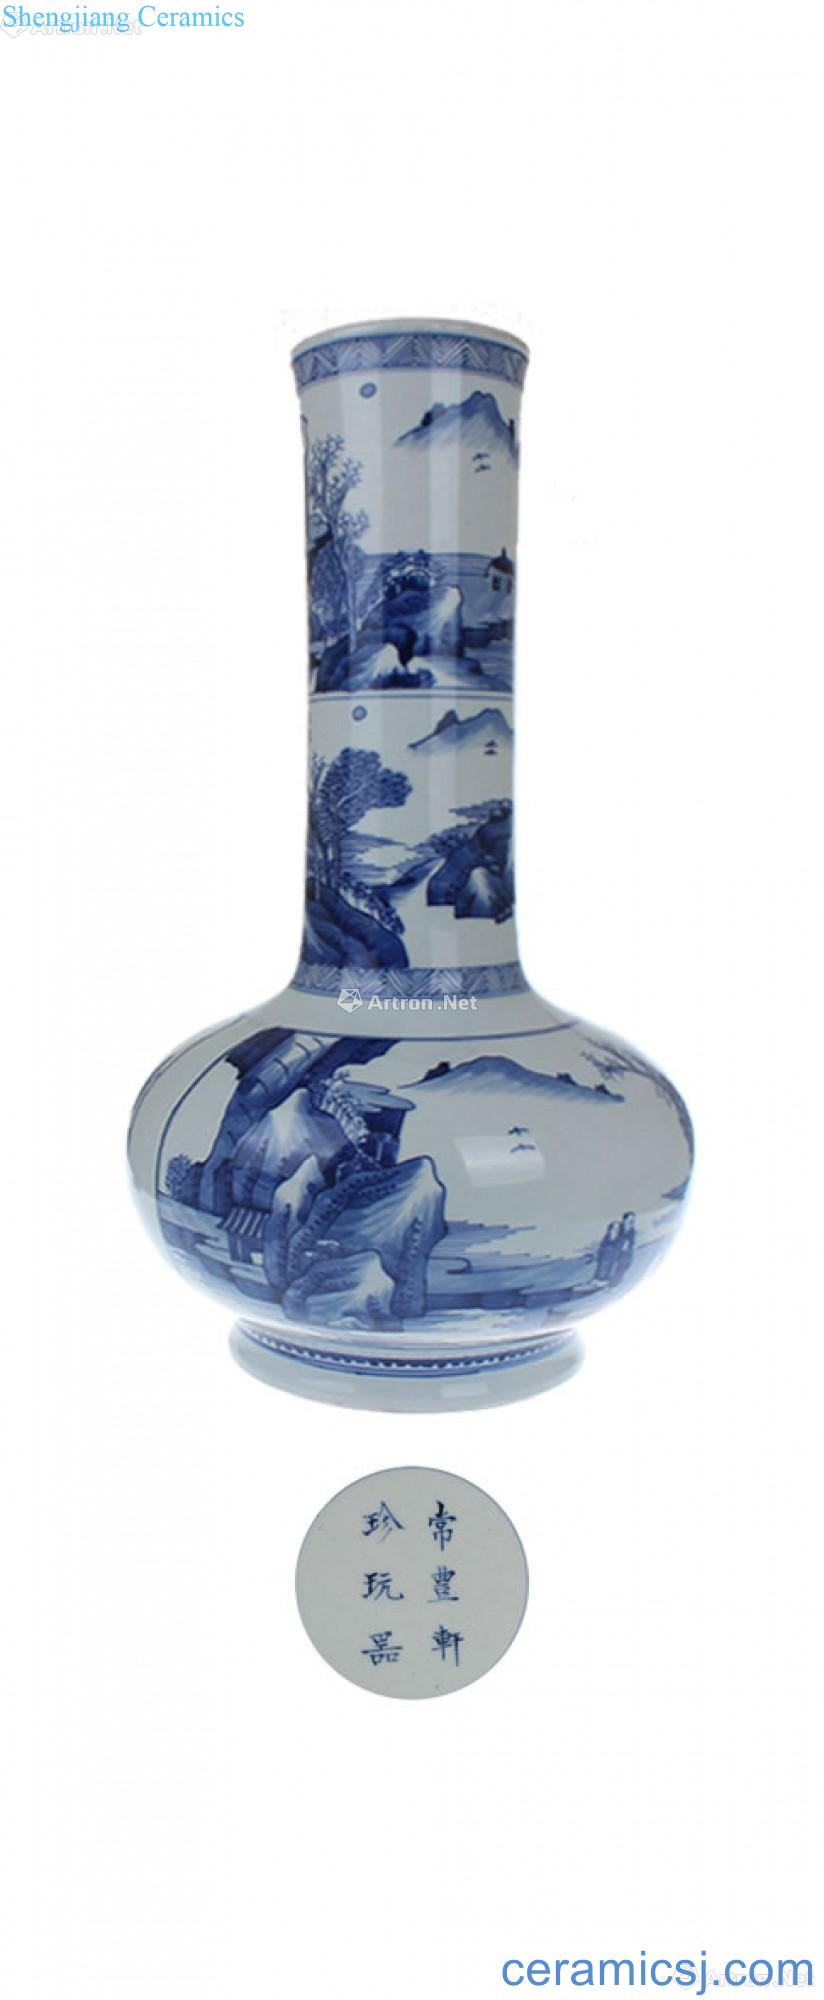 The flask Chang Fengxuan designs of blue and white landscape characters